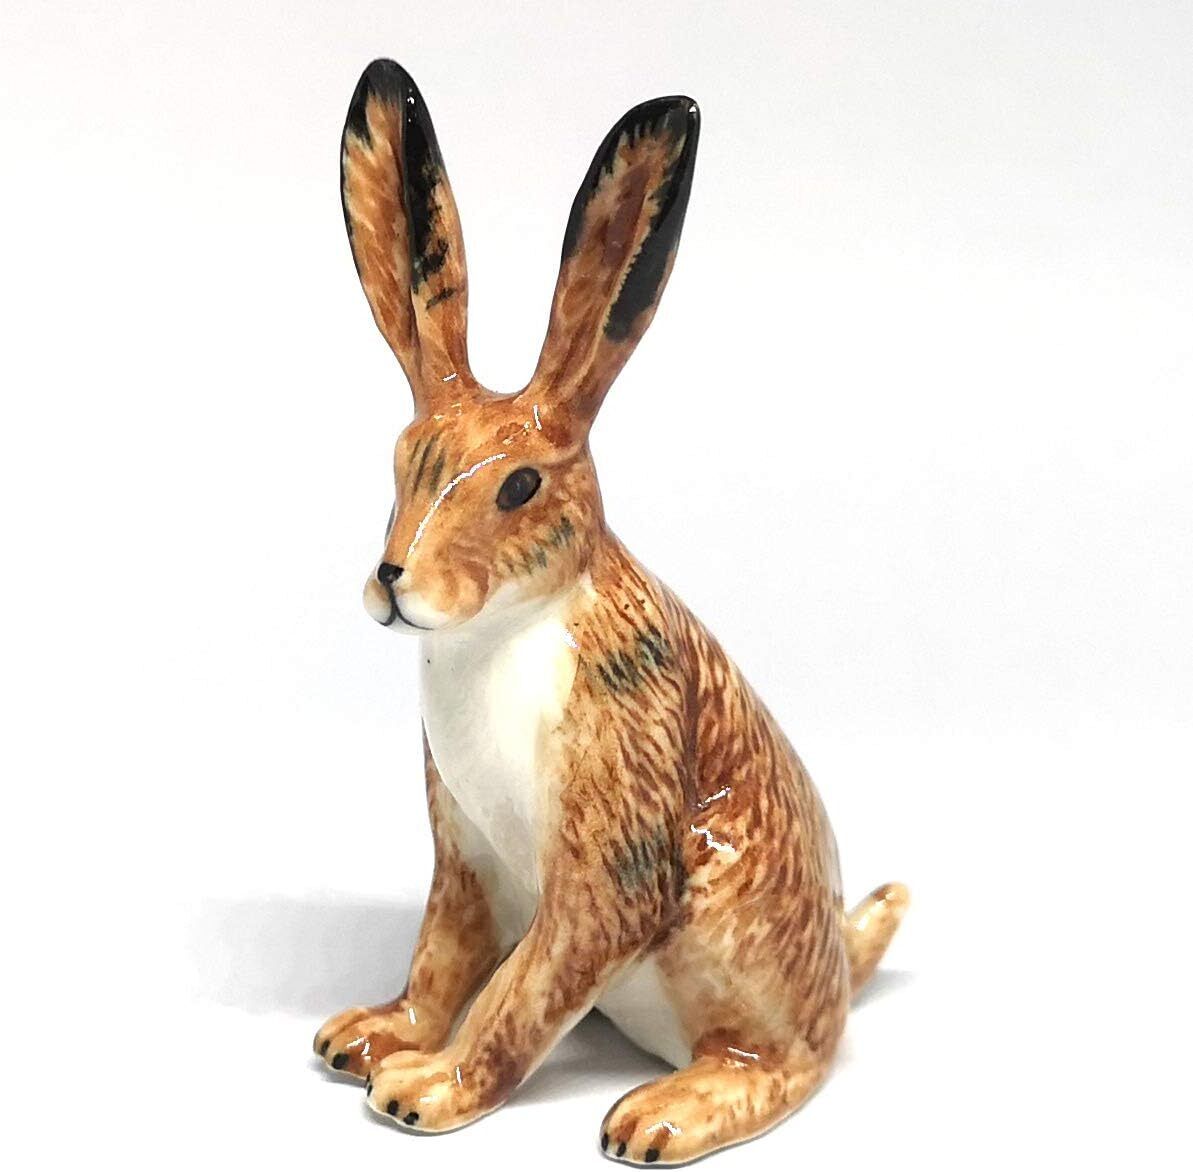 Ceramic Wild Brown Rabbit Figurine Hand Painted Bunny Hare Decor Collection